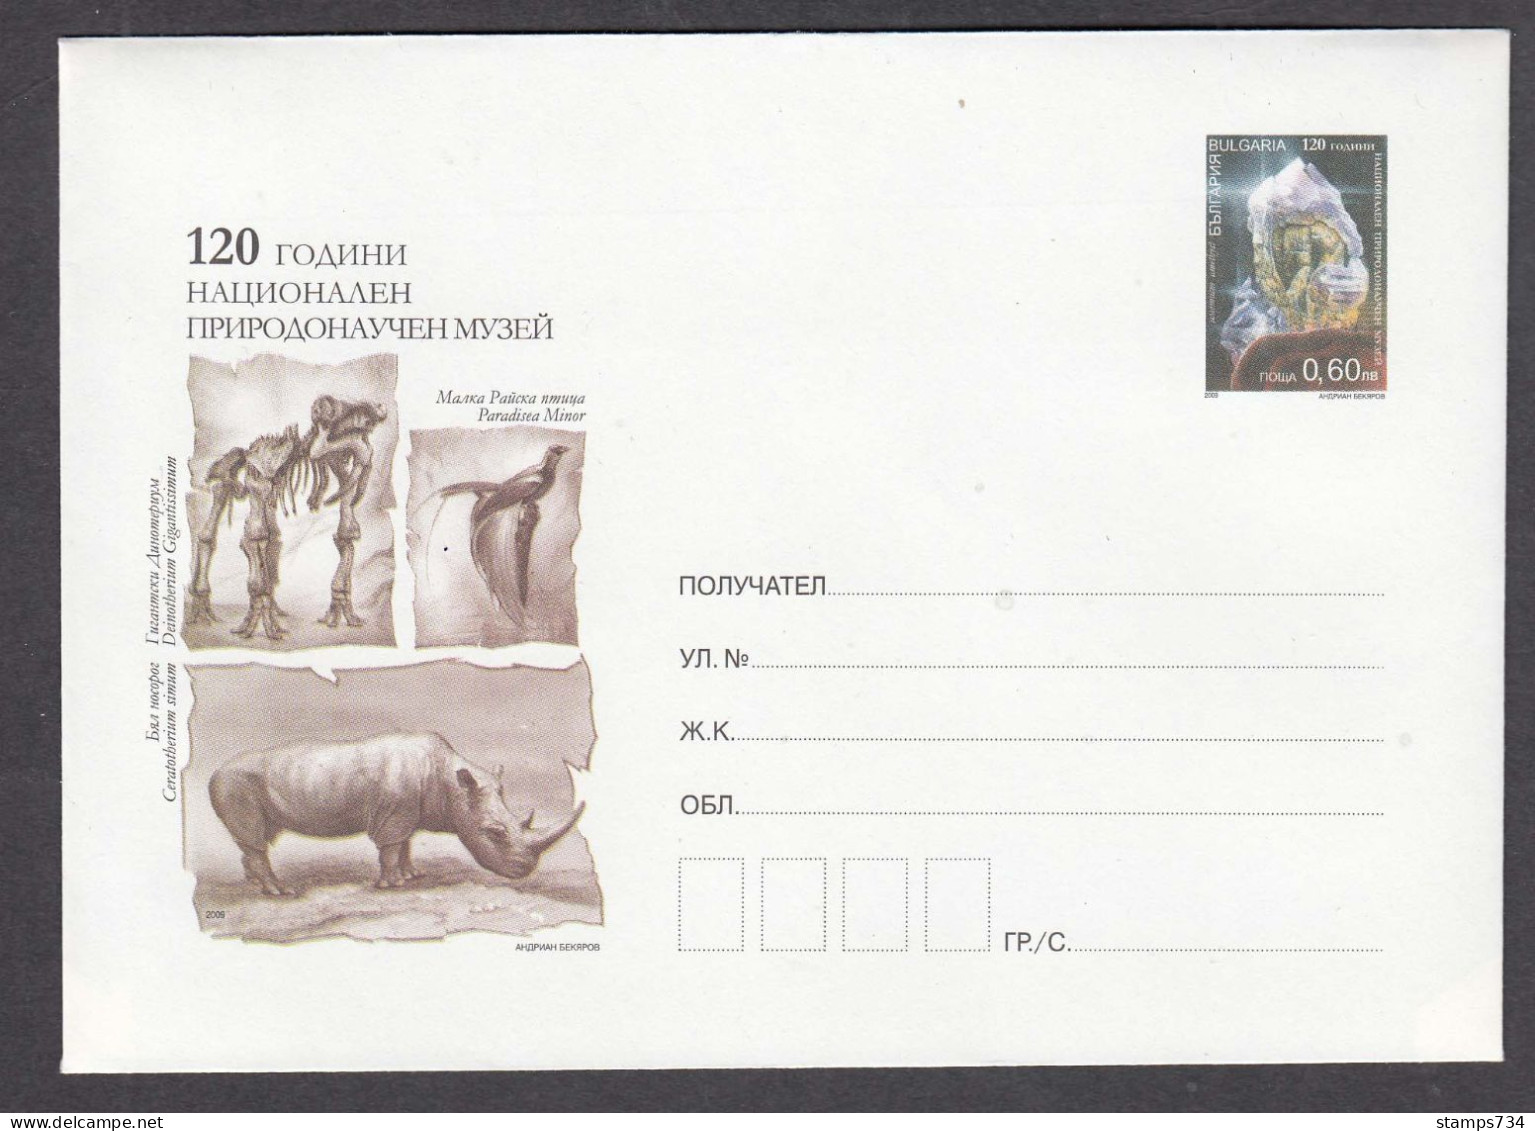 PS 1398/2009 - Mint, 120 Years Of The National Natural History Museum, Mineral, Post. Stationery - Bulgaria - Covers